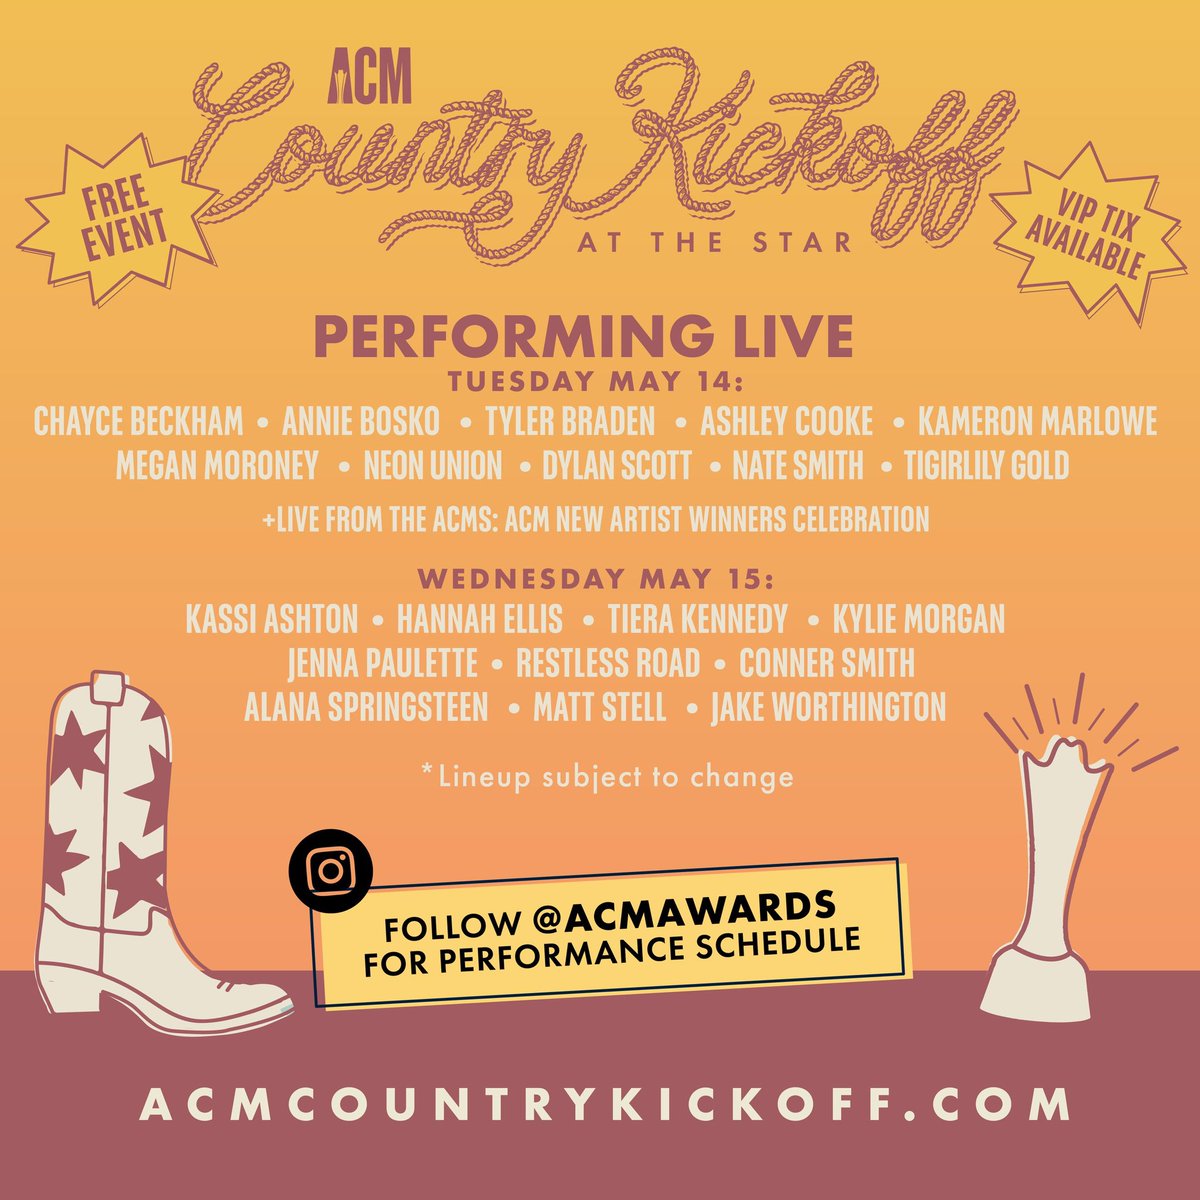 Excited to be a part of ACM Country Kickoff at @thestarinfrisco get @ACMawards Week started. It's a FREE event, full of live music, food, and more, so we better see you there! #ACMkickoff #ACMawards